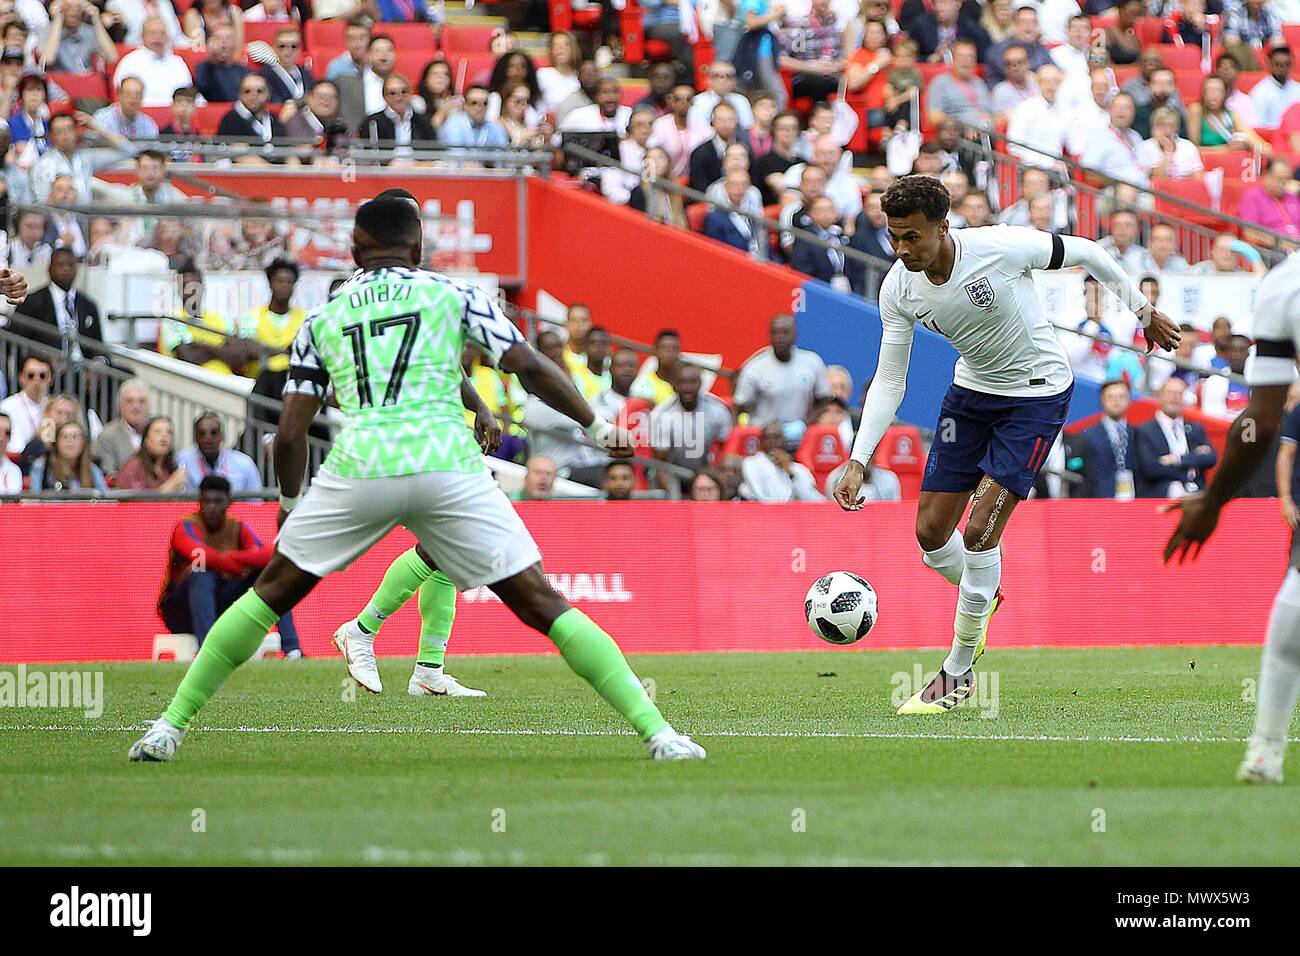 London, UK. 2nd June 2018. Dele Alli of England takes on Ogenyi Onazi of Nigeria during the International Friendly match between England and Nigeria at Wembley Stadium on June 2nd 2018 in London, England. (Photo by Matt Bradshaw/phcimages.com) Credit: PHC Images/Alamy Live News Stock Photo